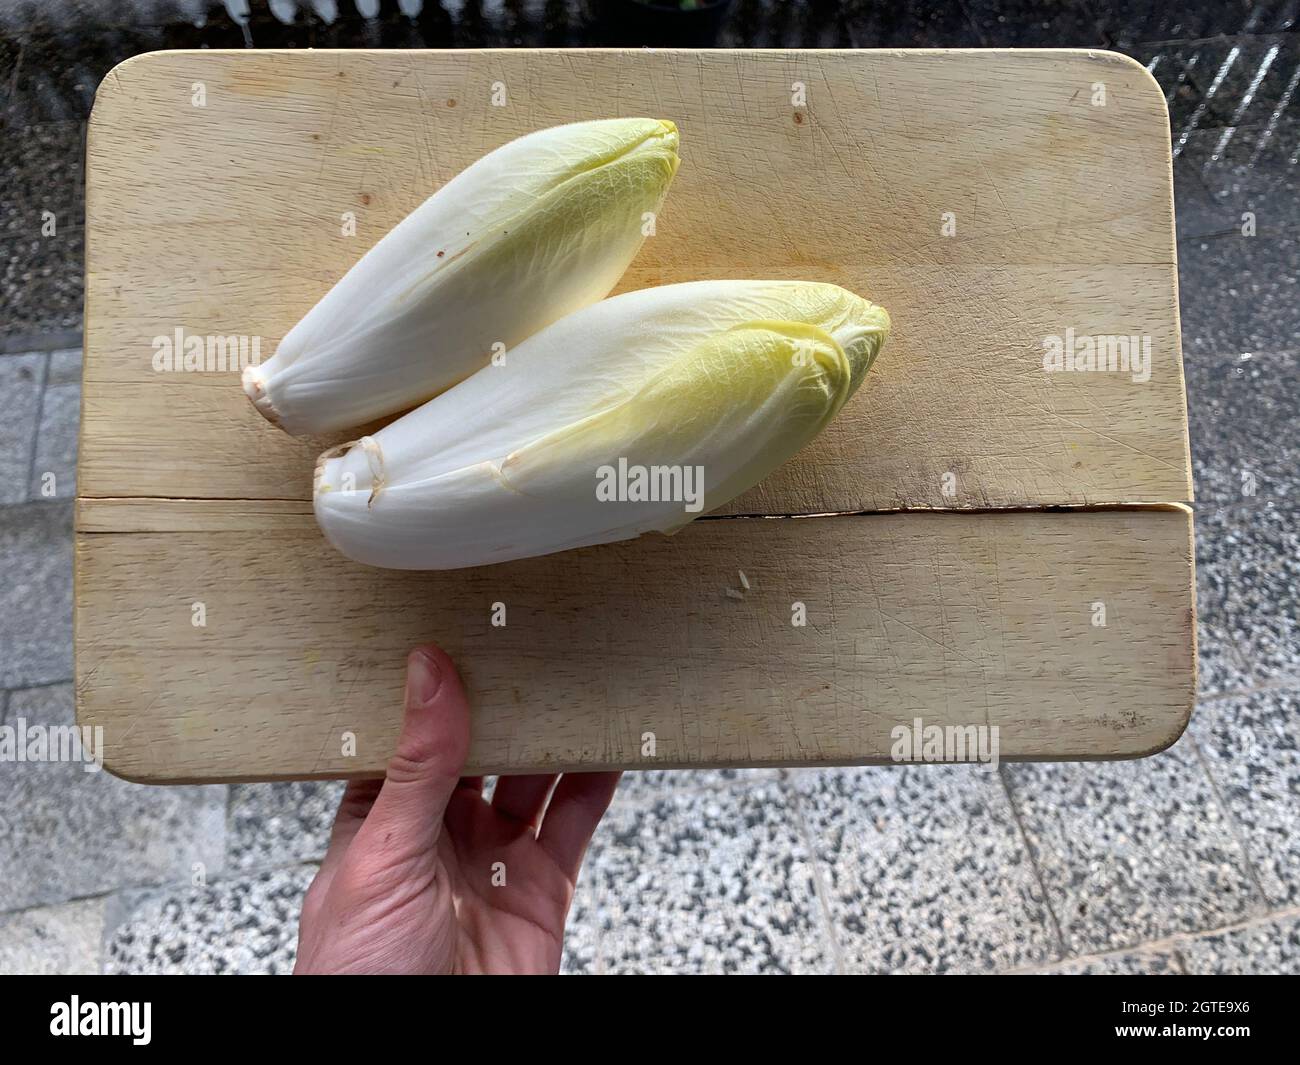 High Angle View Of Fresh Chicory Vegetable On Cutting Board Stock Photo